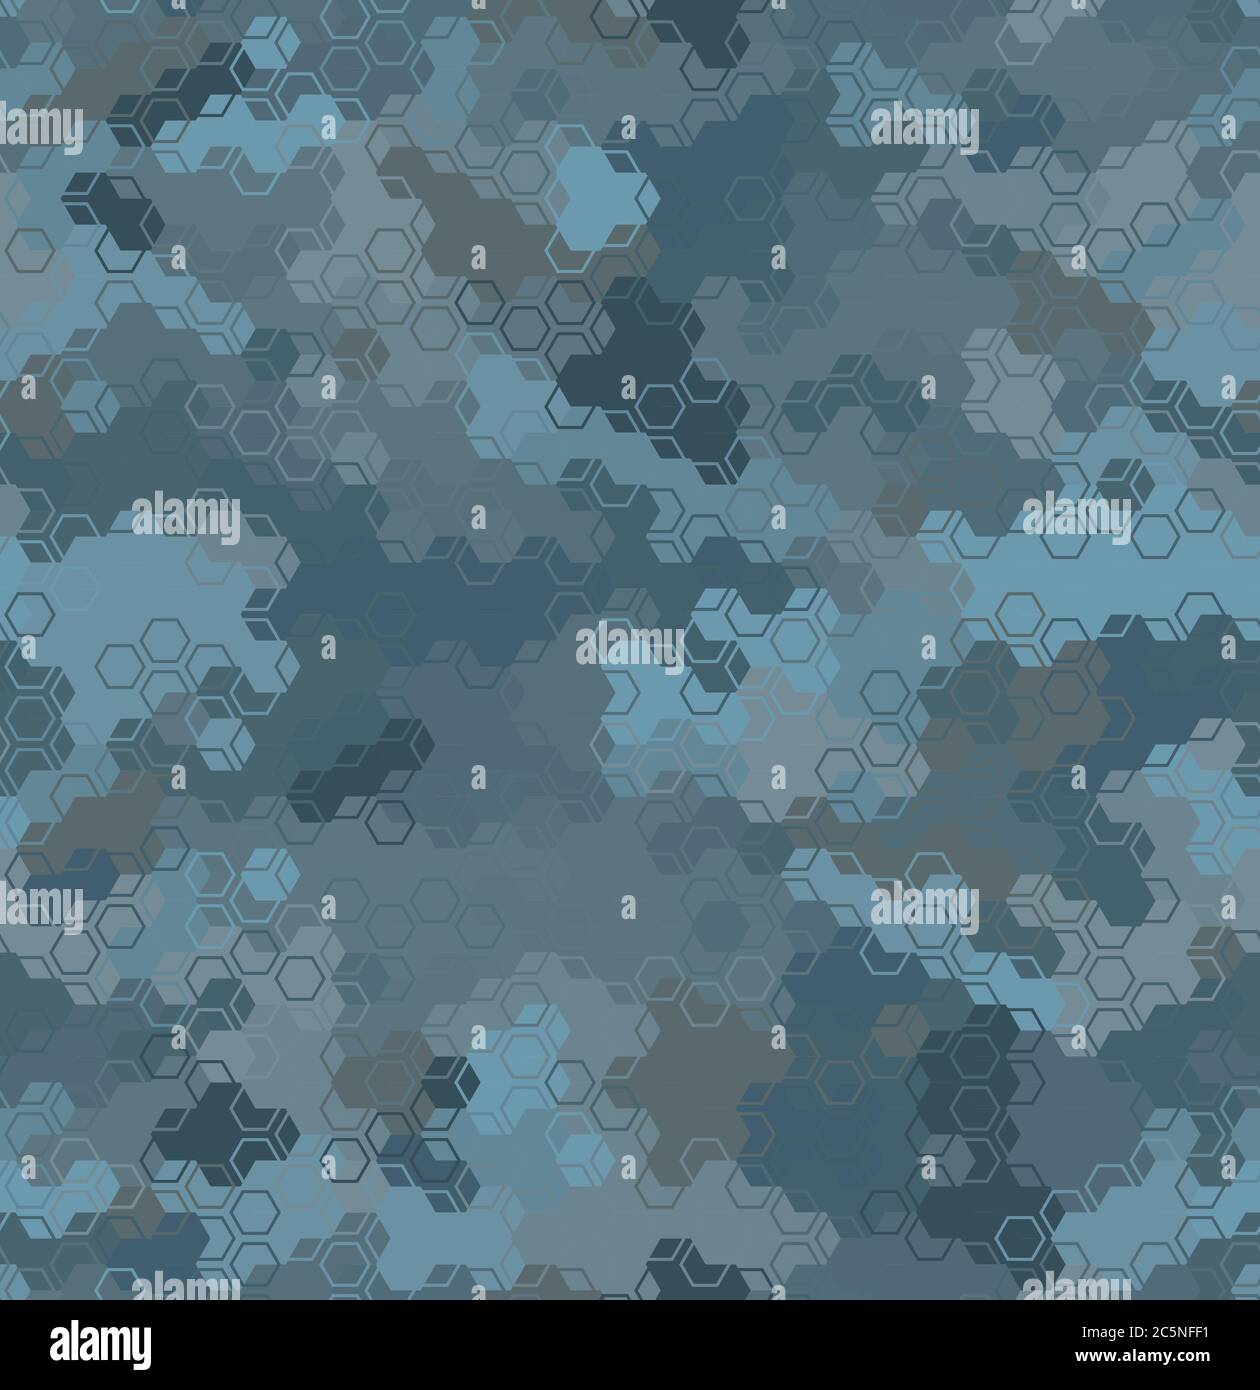 Abstract Navy Camouflage Seamless Vector Pattern